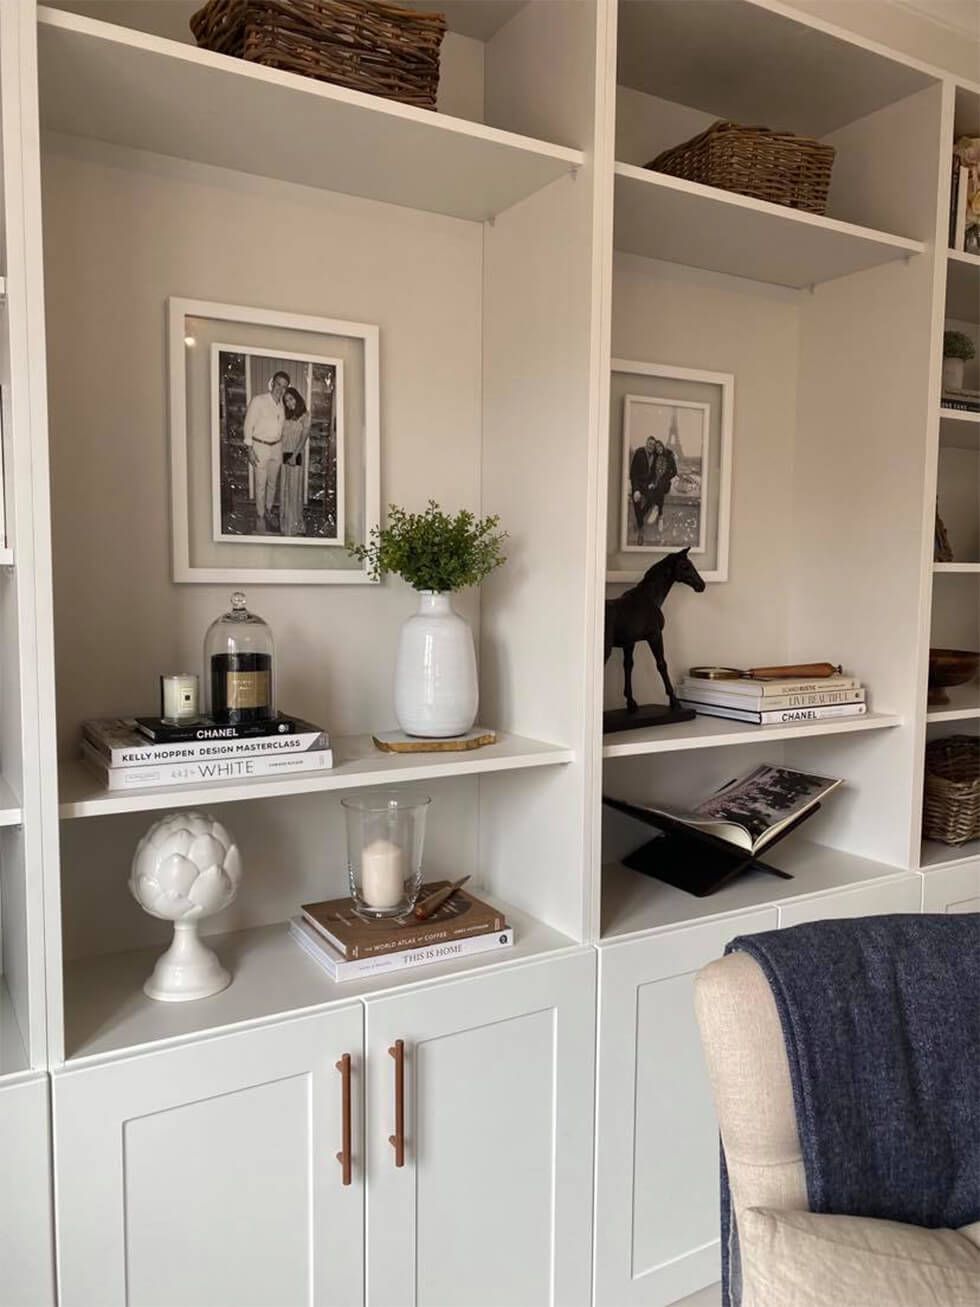 Built-in bookshelves styled with candles, books and framed photographs